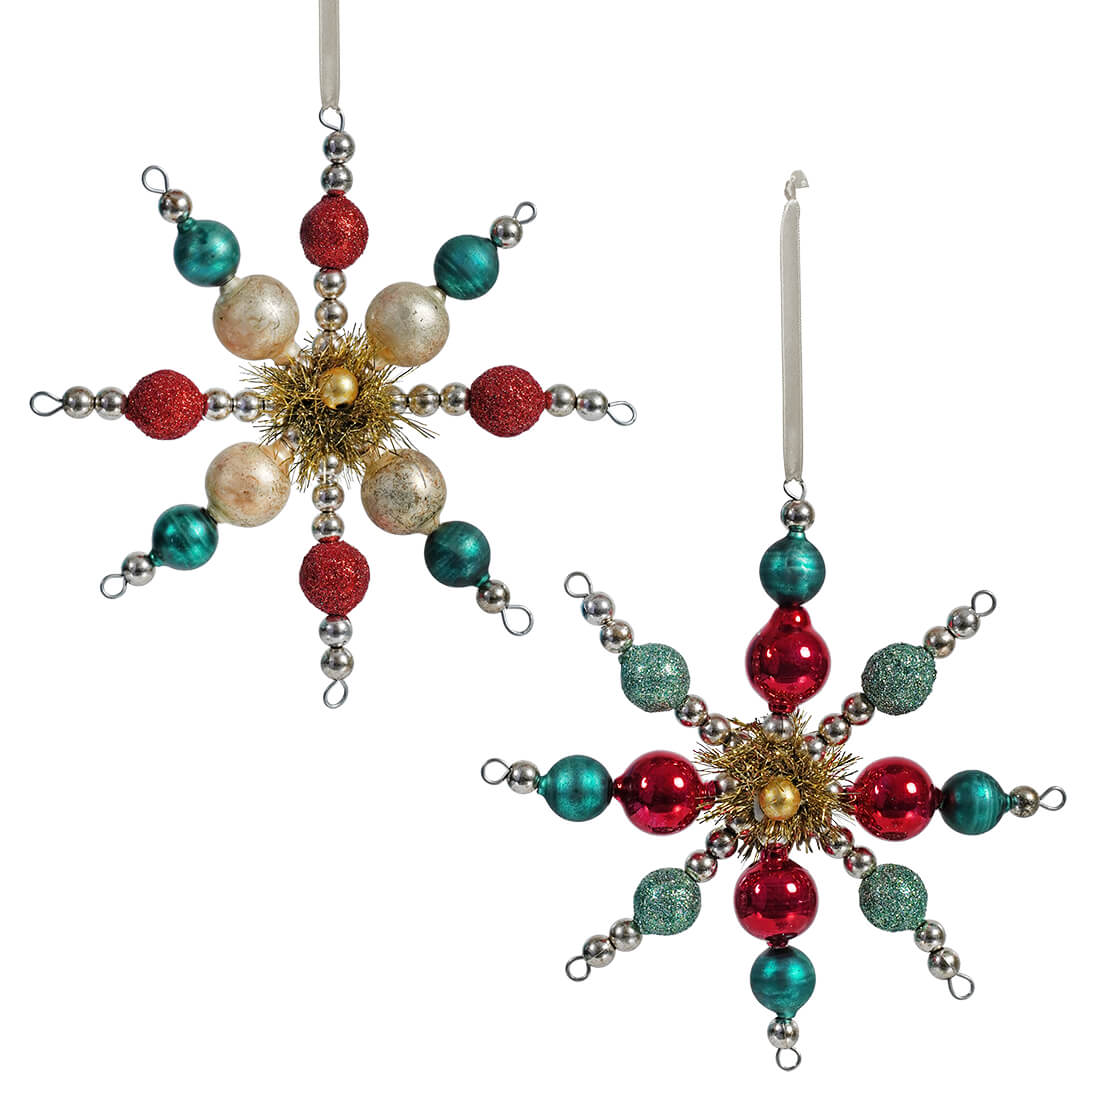 Glass Bead Snowflake Ornaments with Tinsel & Glitter Set/2